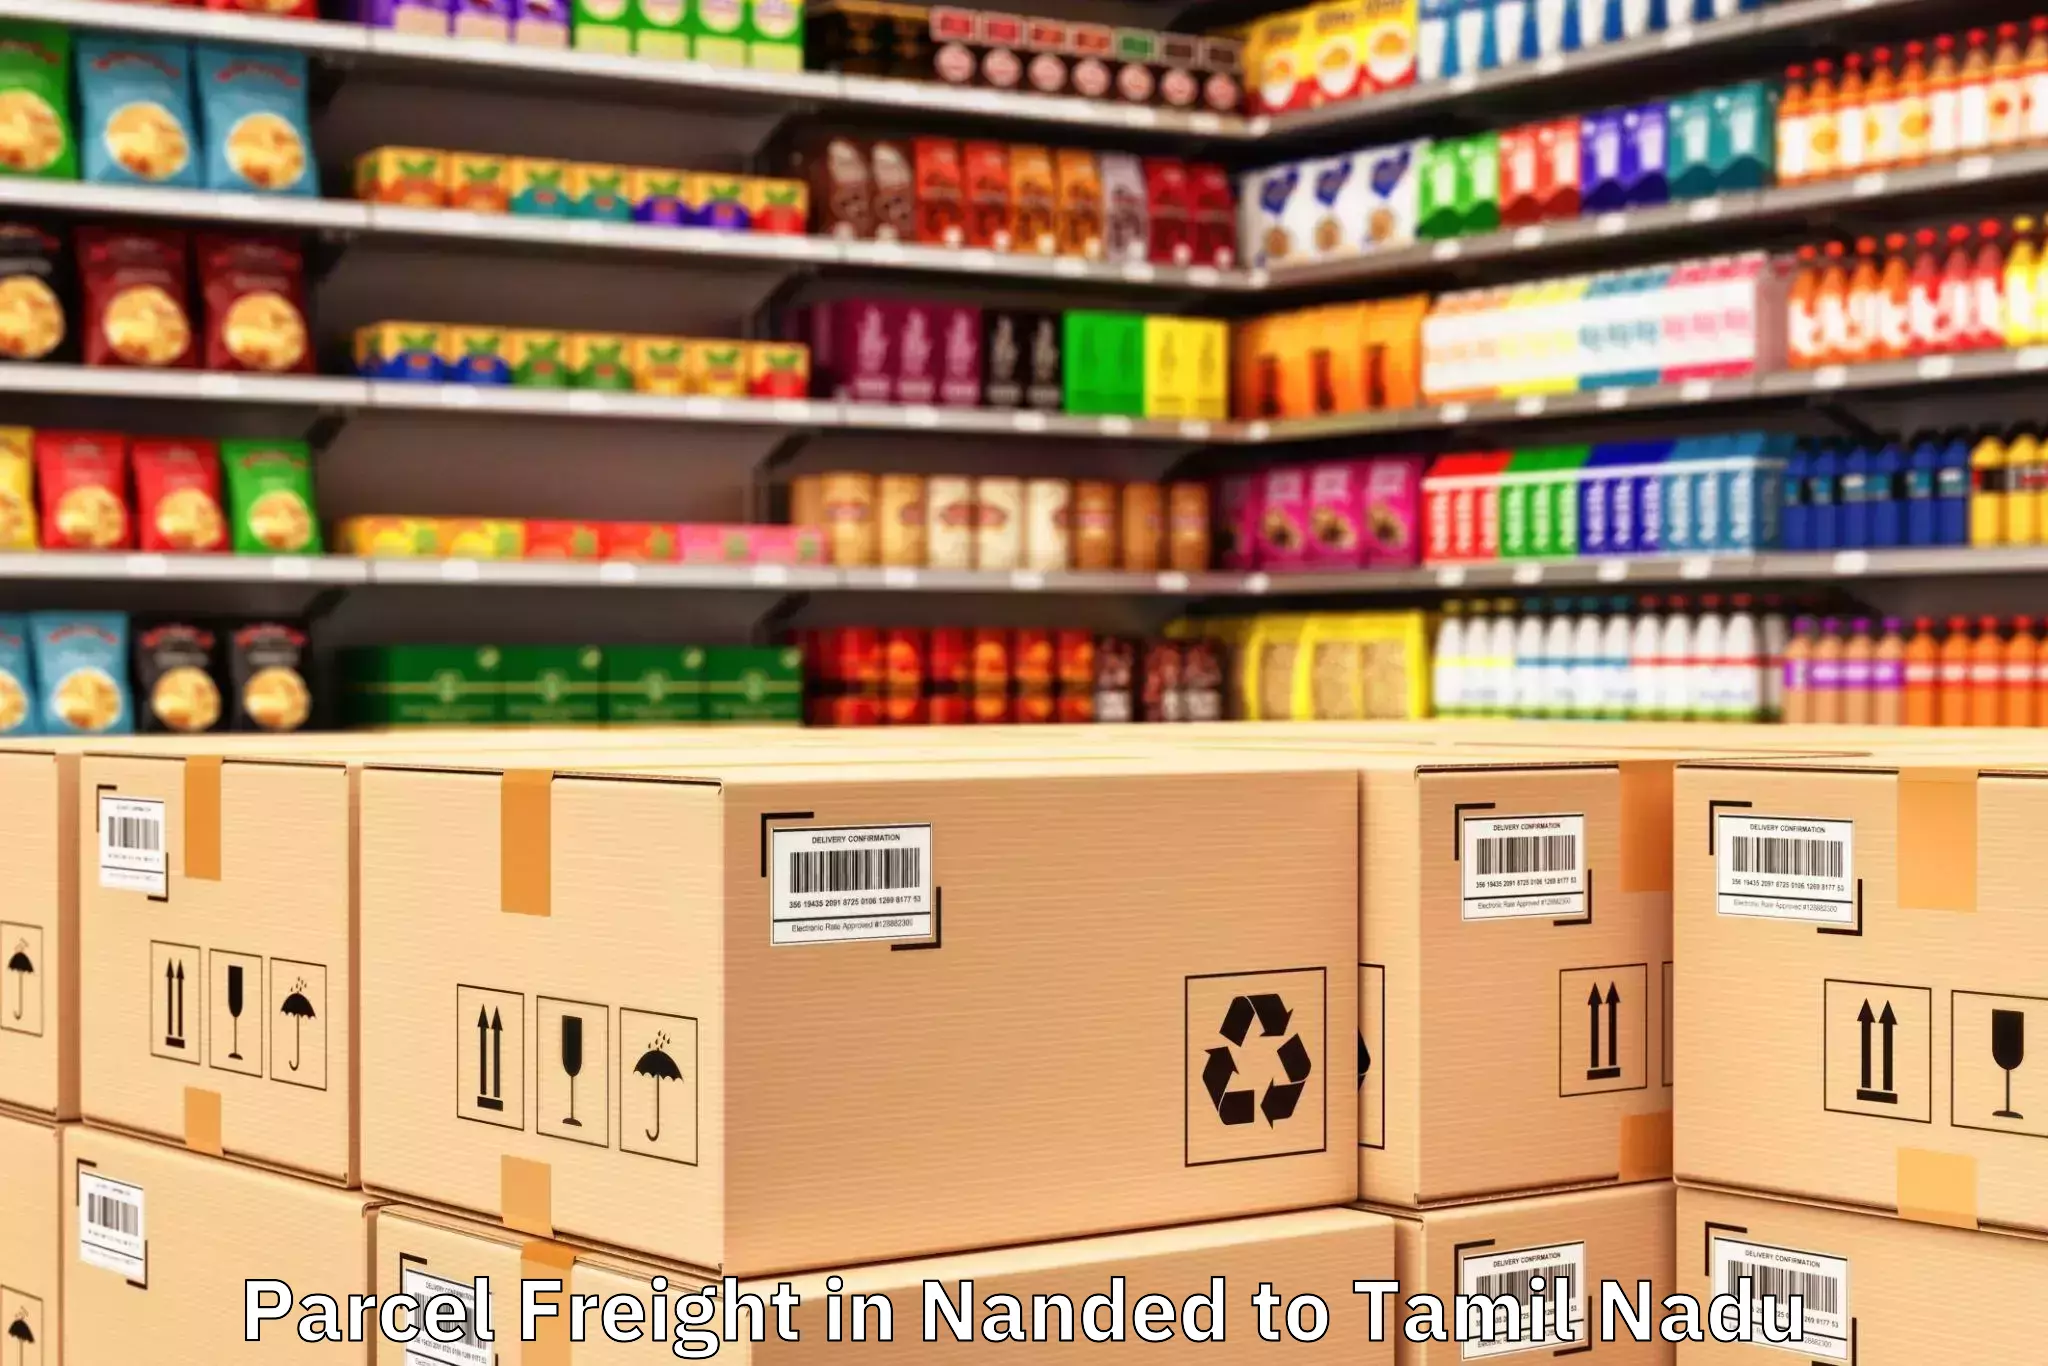 Nanded to Ambattur Industrial Estate Parcel Freight